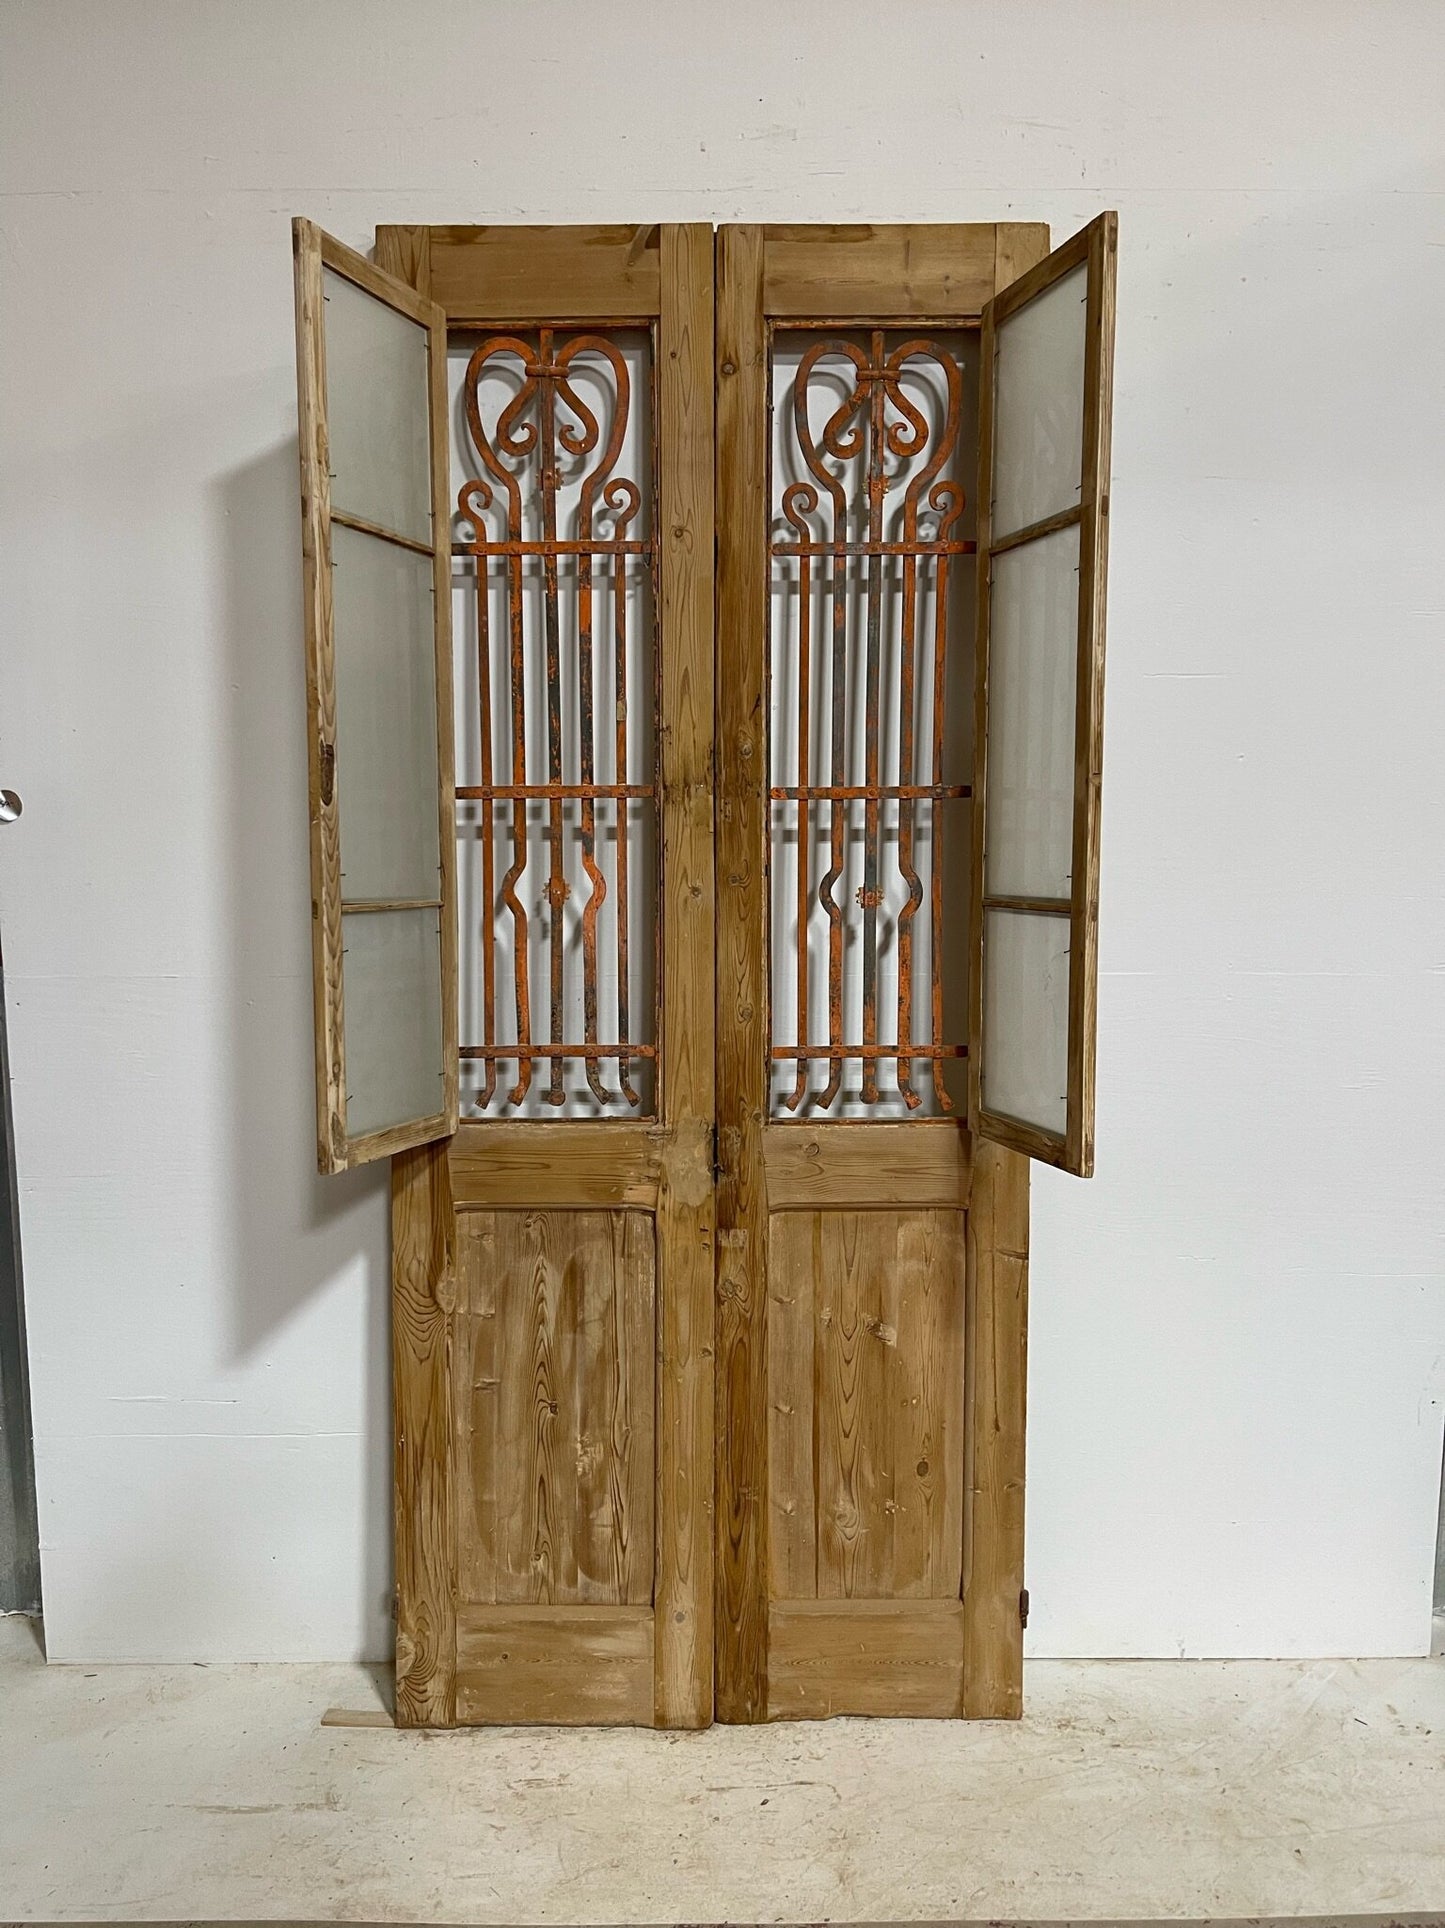 Antique French doors (93X40.25) with metal G1030